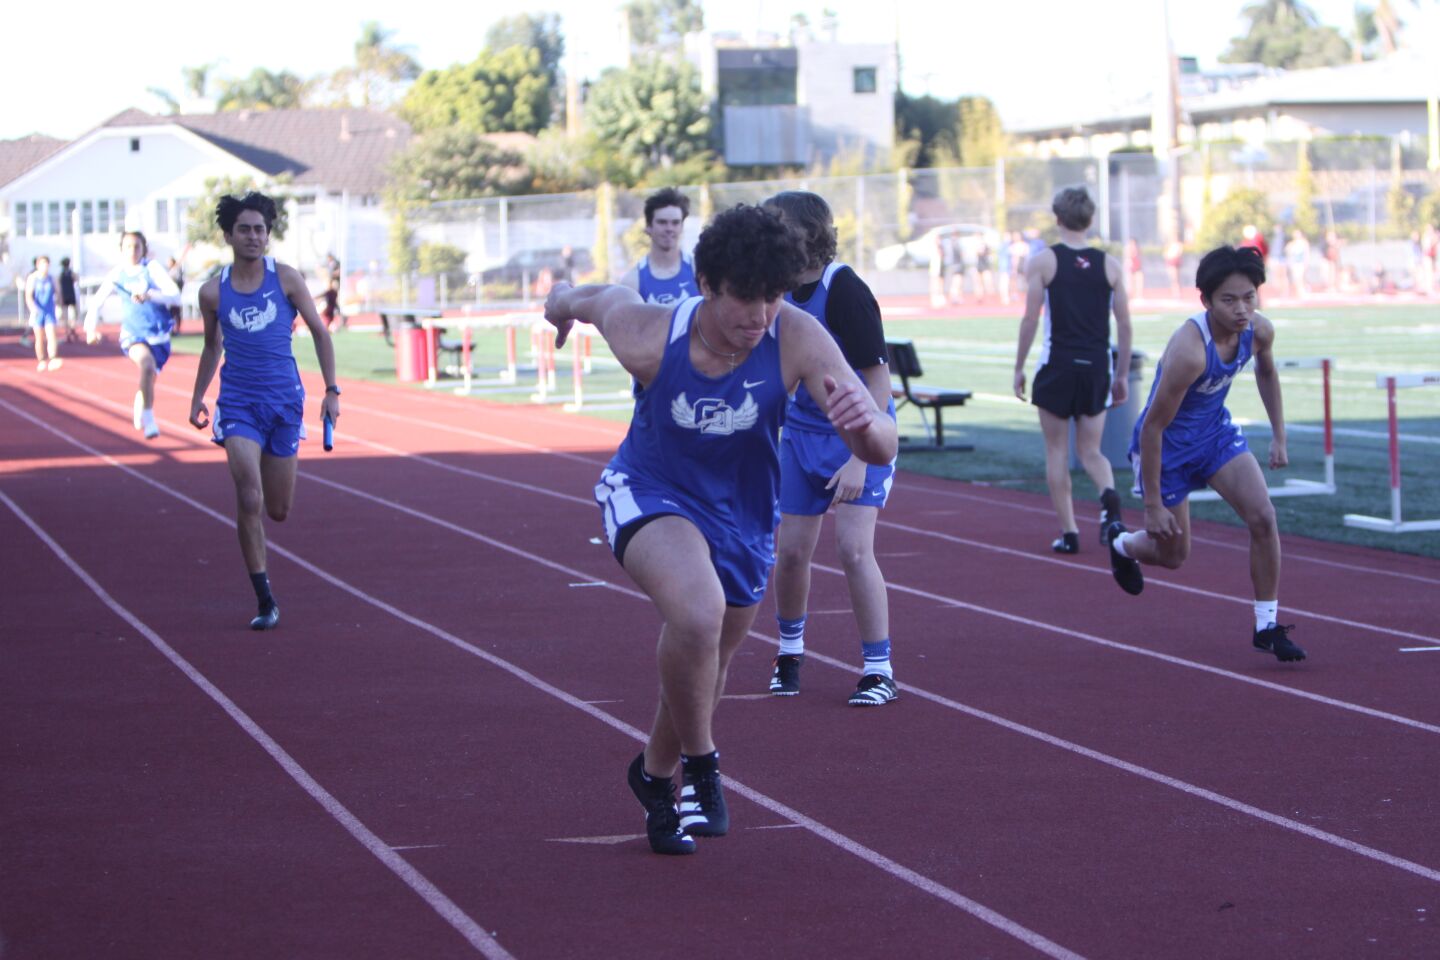 La Jolla Country Day School runners compete in the relay race.